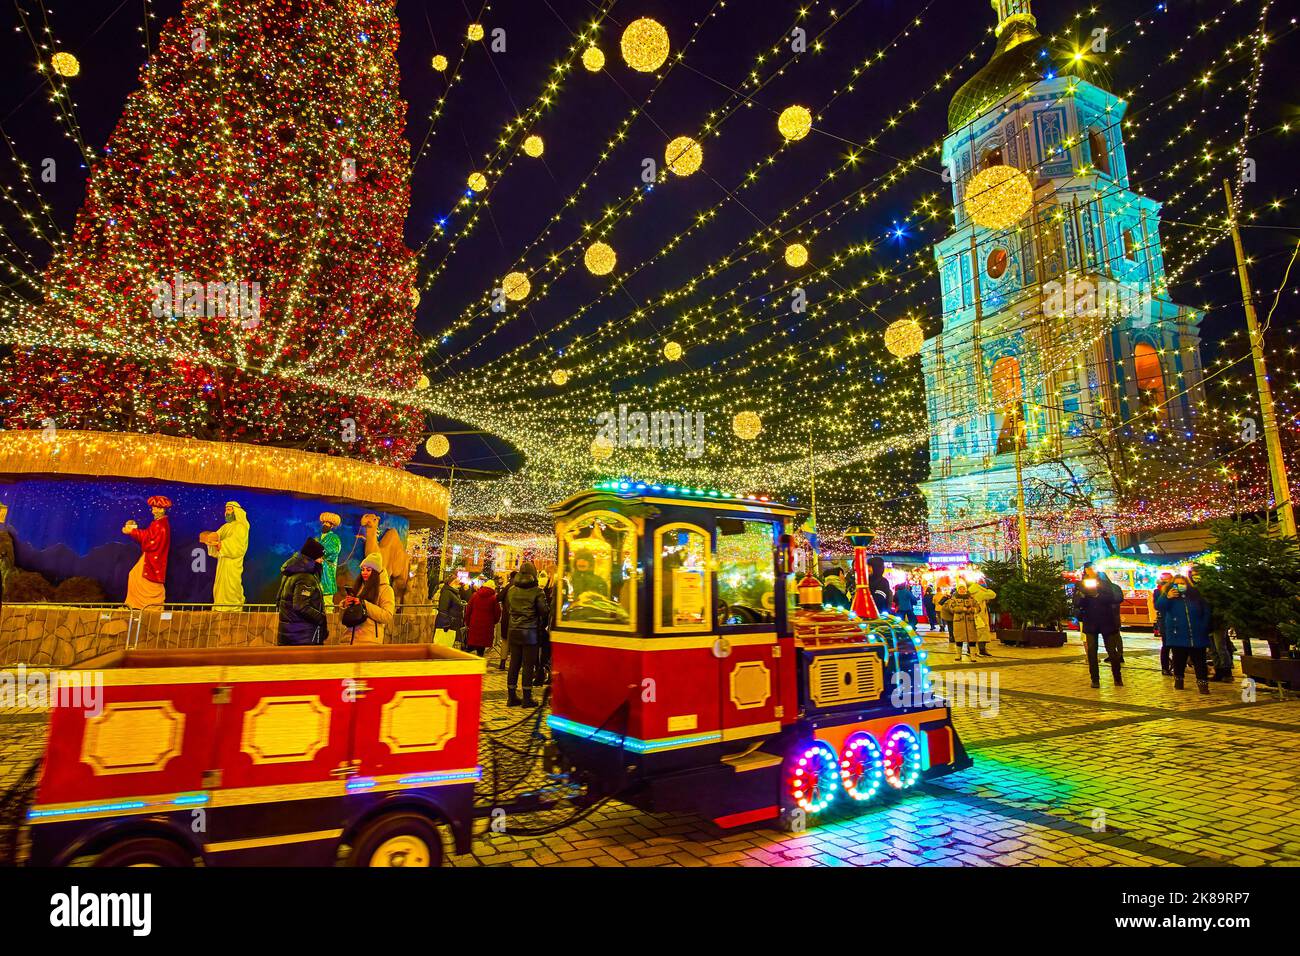 KYIV, UKRAINE - DECEMBER 28, 2021: St Sophia Square with Christmas Fair stalls, shiny tourist train, main Christmas Tree and medieval bell tower of St Stock Photo